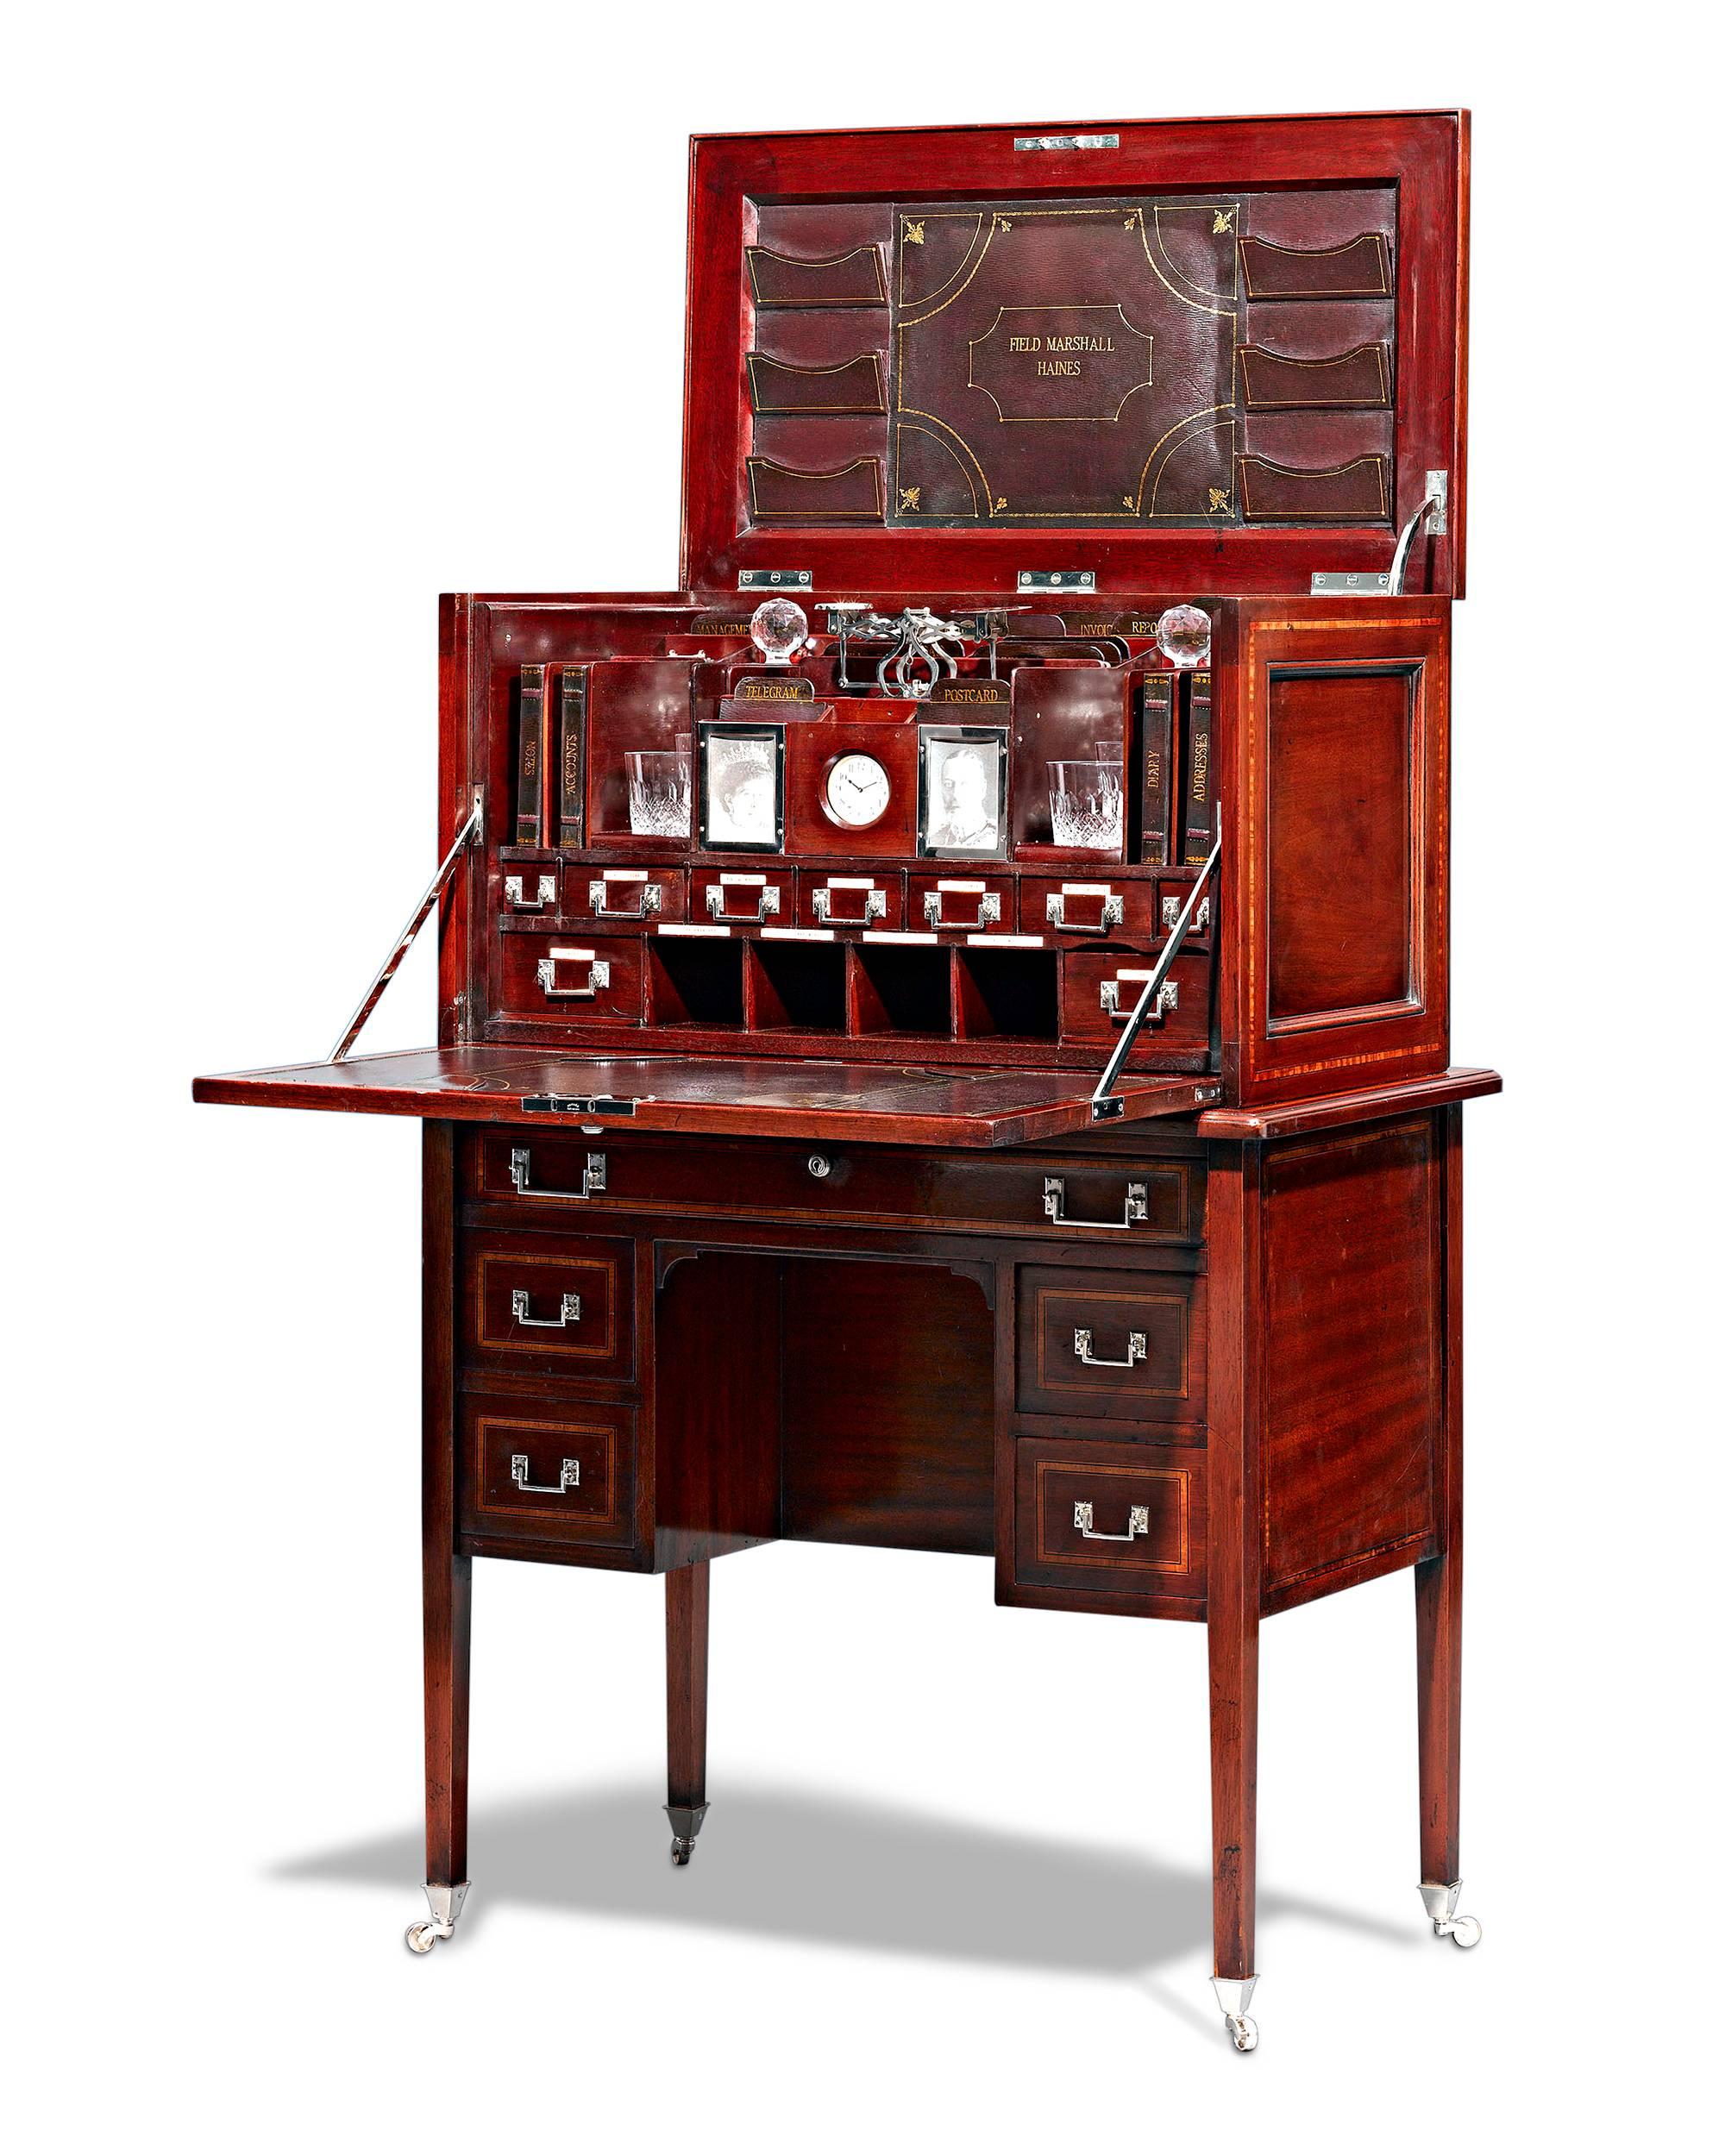 This extraordinary and rare English desk is an impeccable example of English campaign furniture. Crafted of mahogany, this compact desk was in service under Field Marshal Sir Frederick Paul Haines, the celebrated military officer known for his